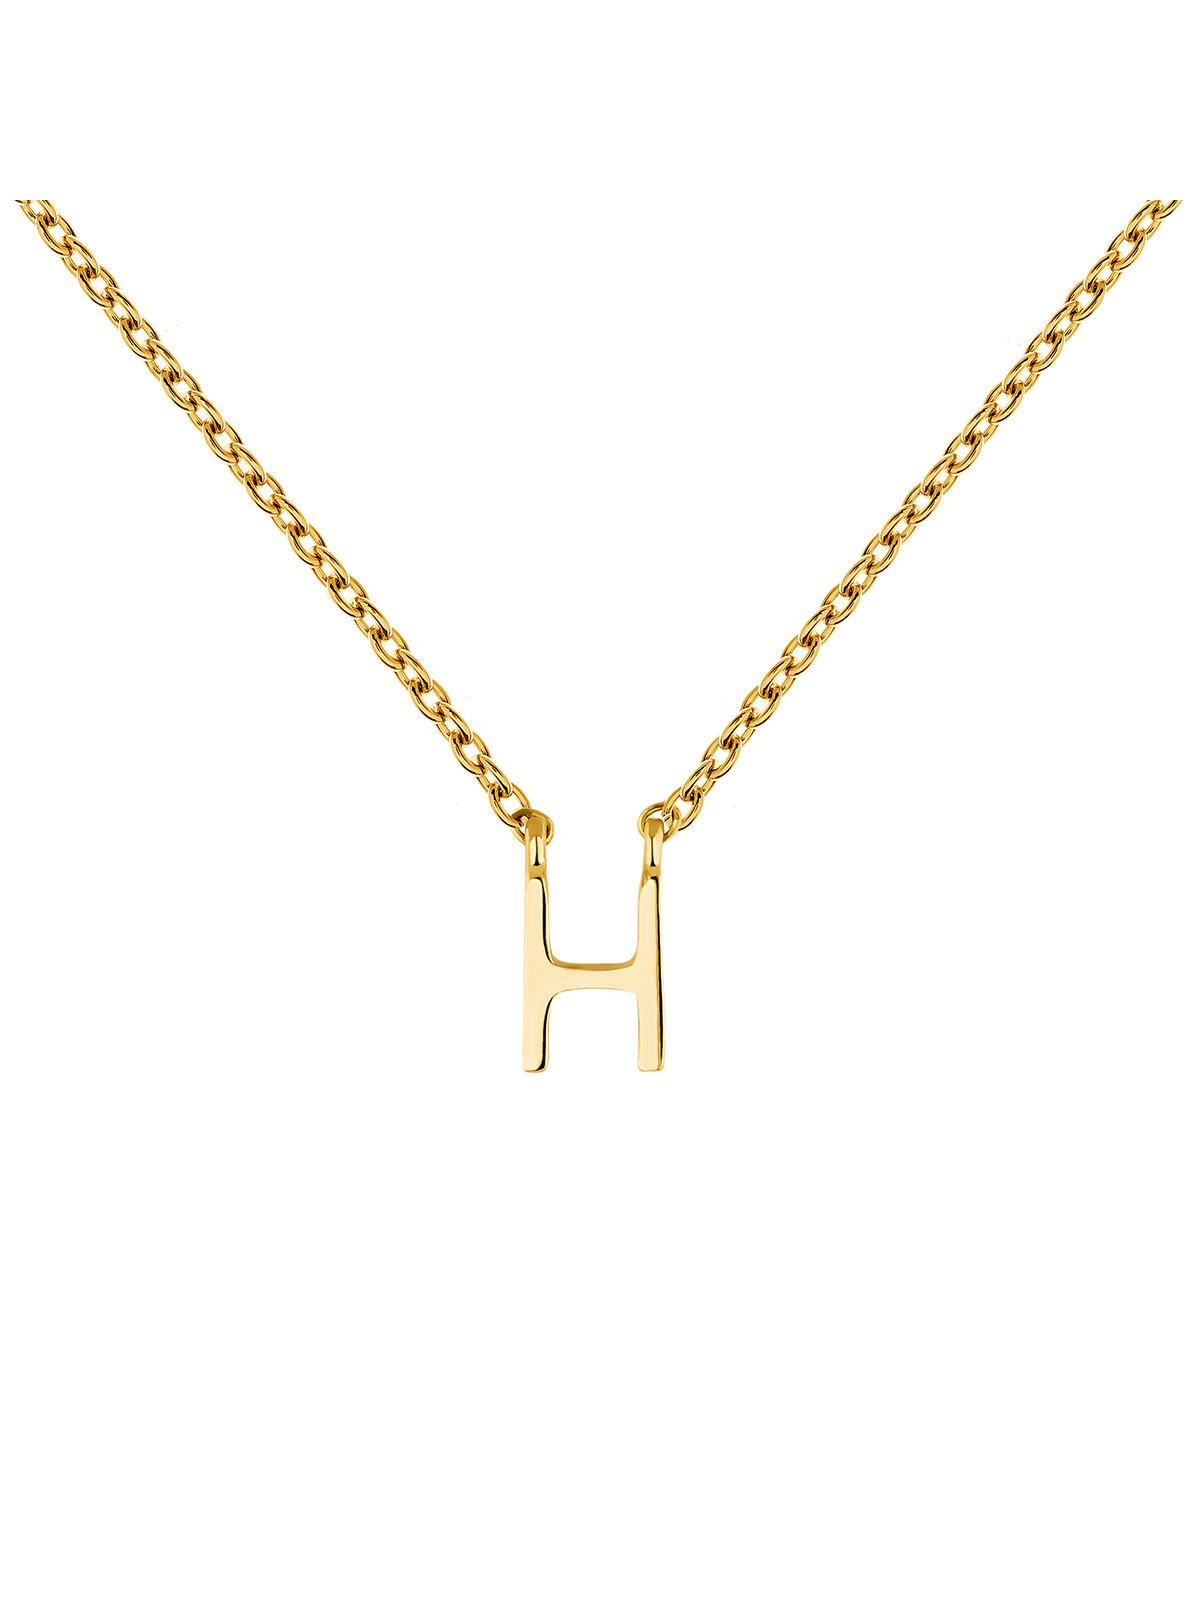 Collier initiale H or , J04382-02-H, mainproduct